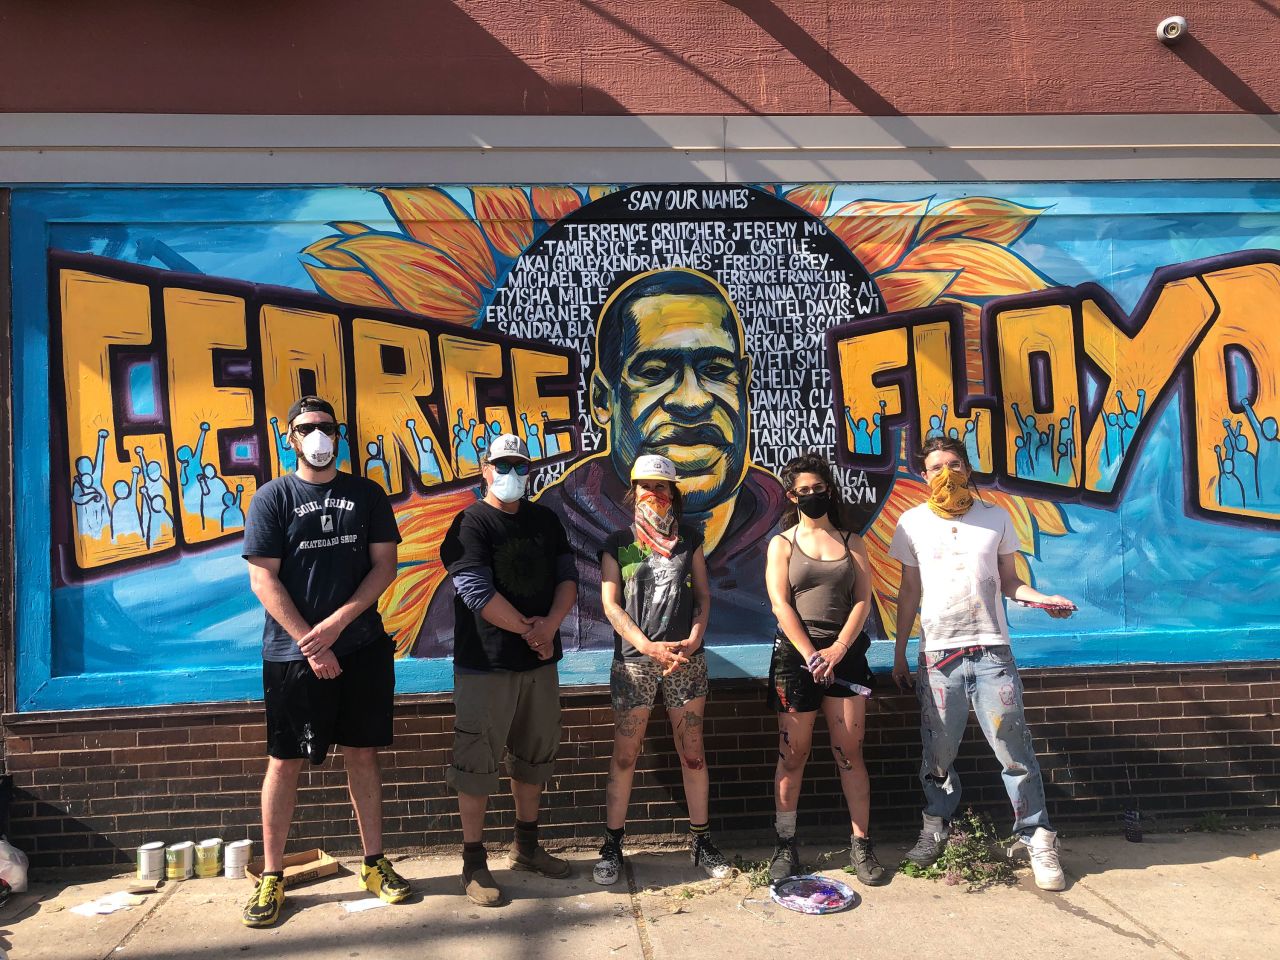 The artists stand in front of the George Floyd memorial mural that they painted in Minneapolis. From left to right: Niko Alexander, Cadex Herrera, Greta McLain, Xena Goldman, Pablo Helm Hernandez.